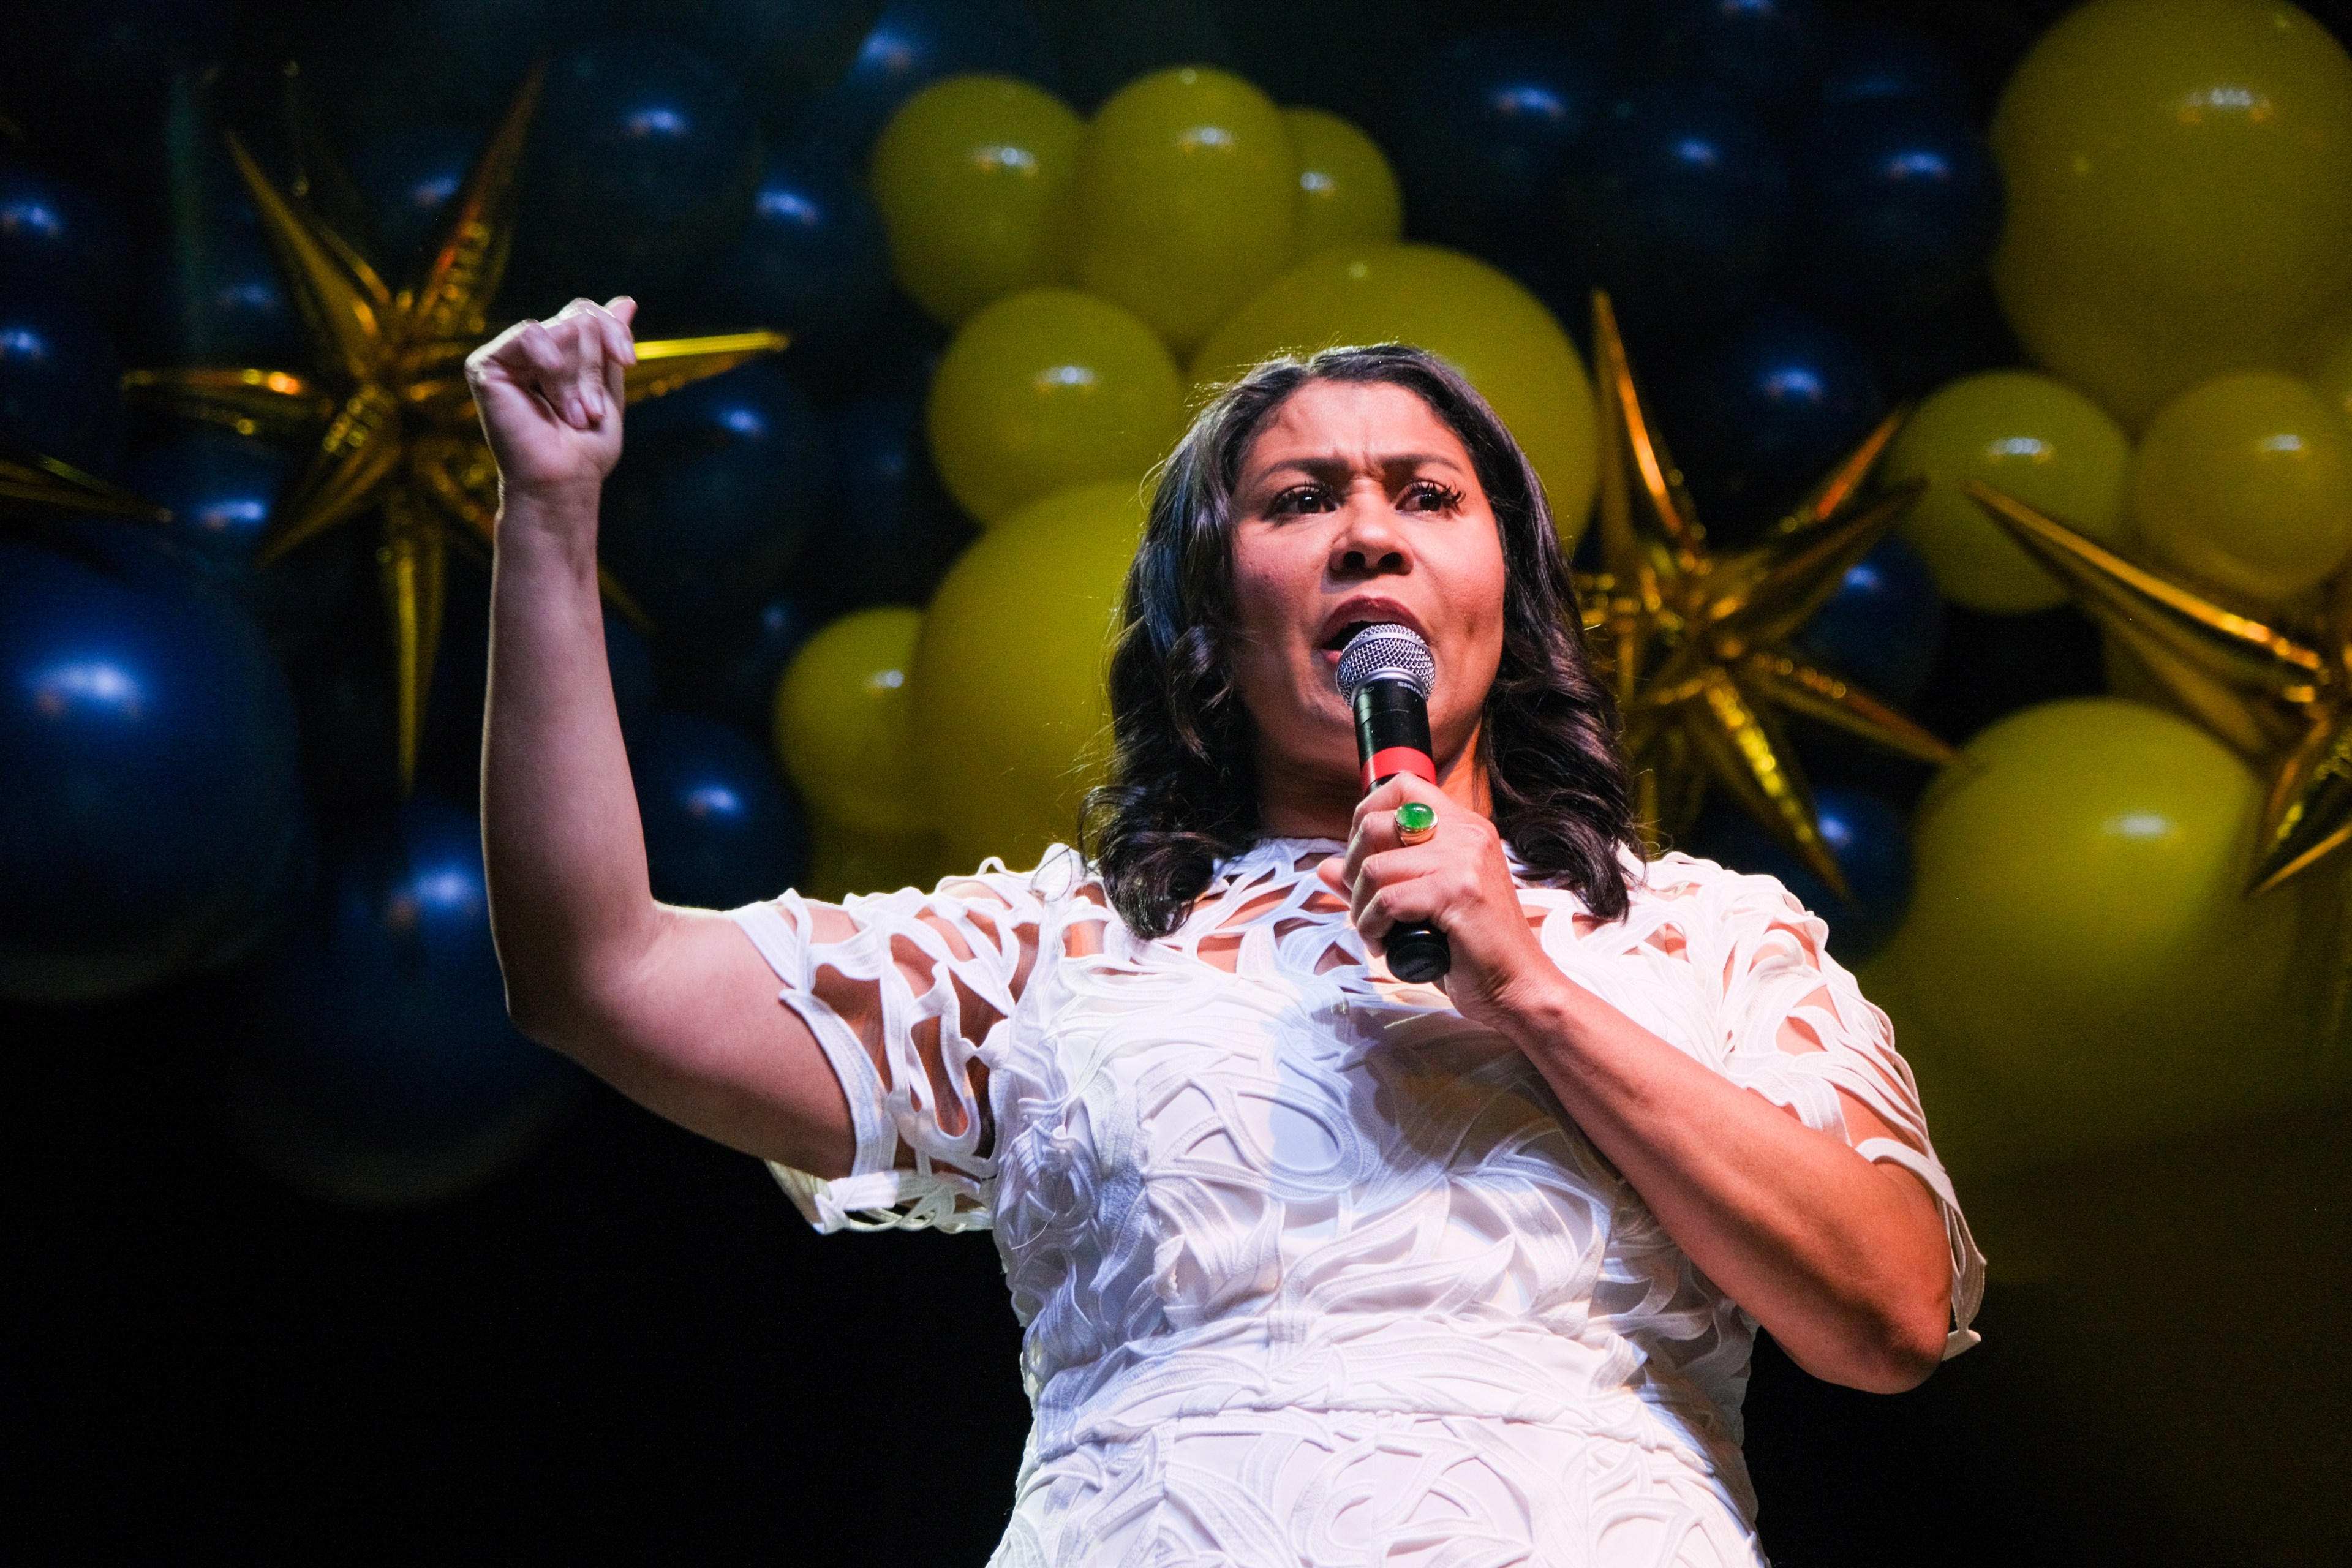 Mayor London Breed in a white patterned dress jumper into a microphone, passionately raising her fist, with festive gold and blue balloons in the background.